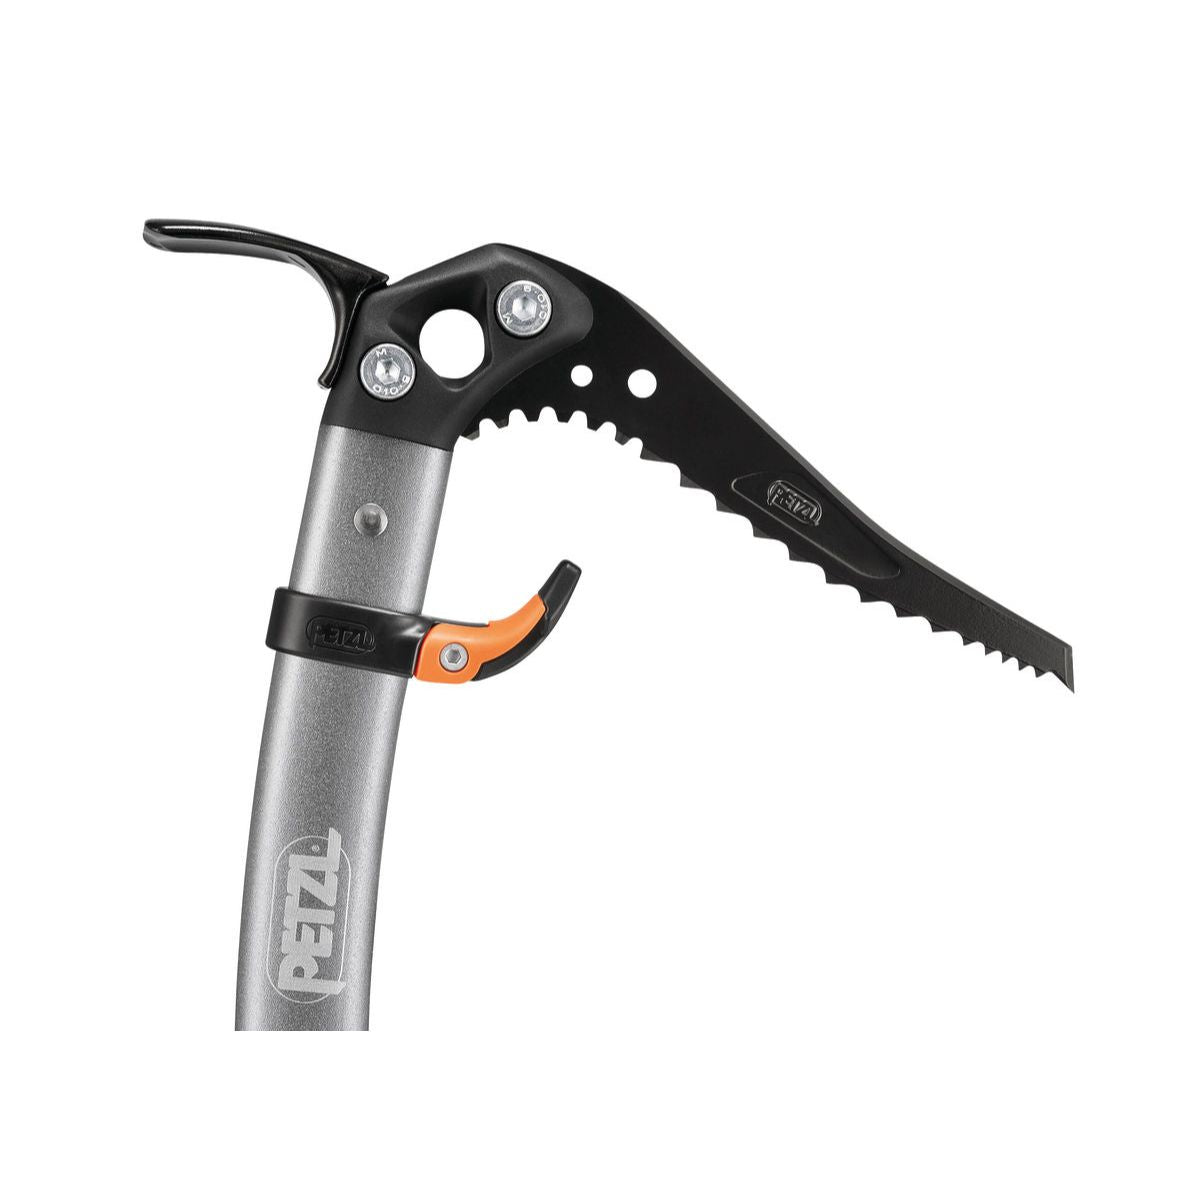 Petzl Trigrest trigger for summit ice axes in black and orange showing trigger at top